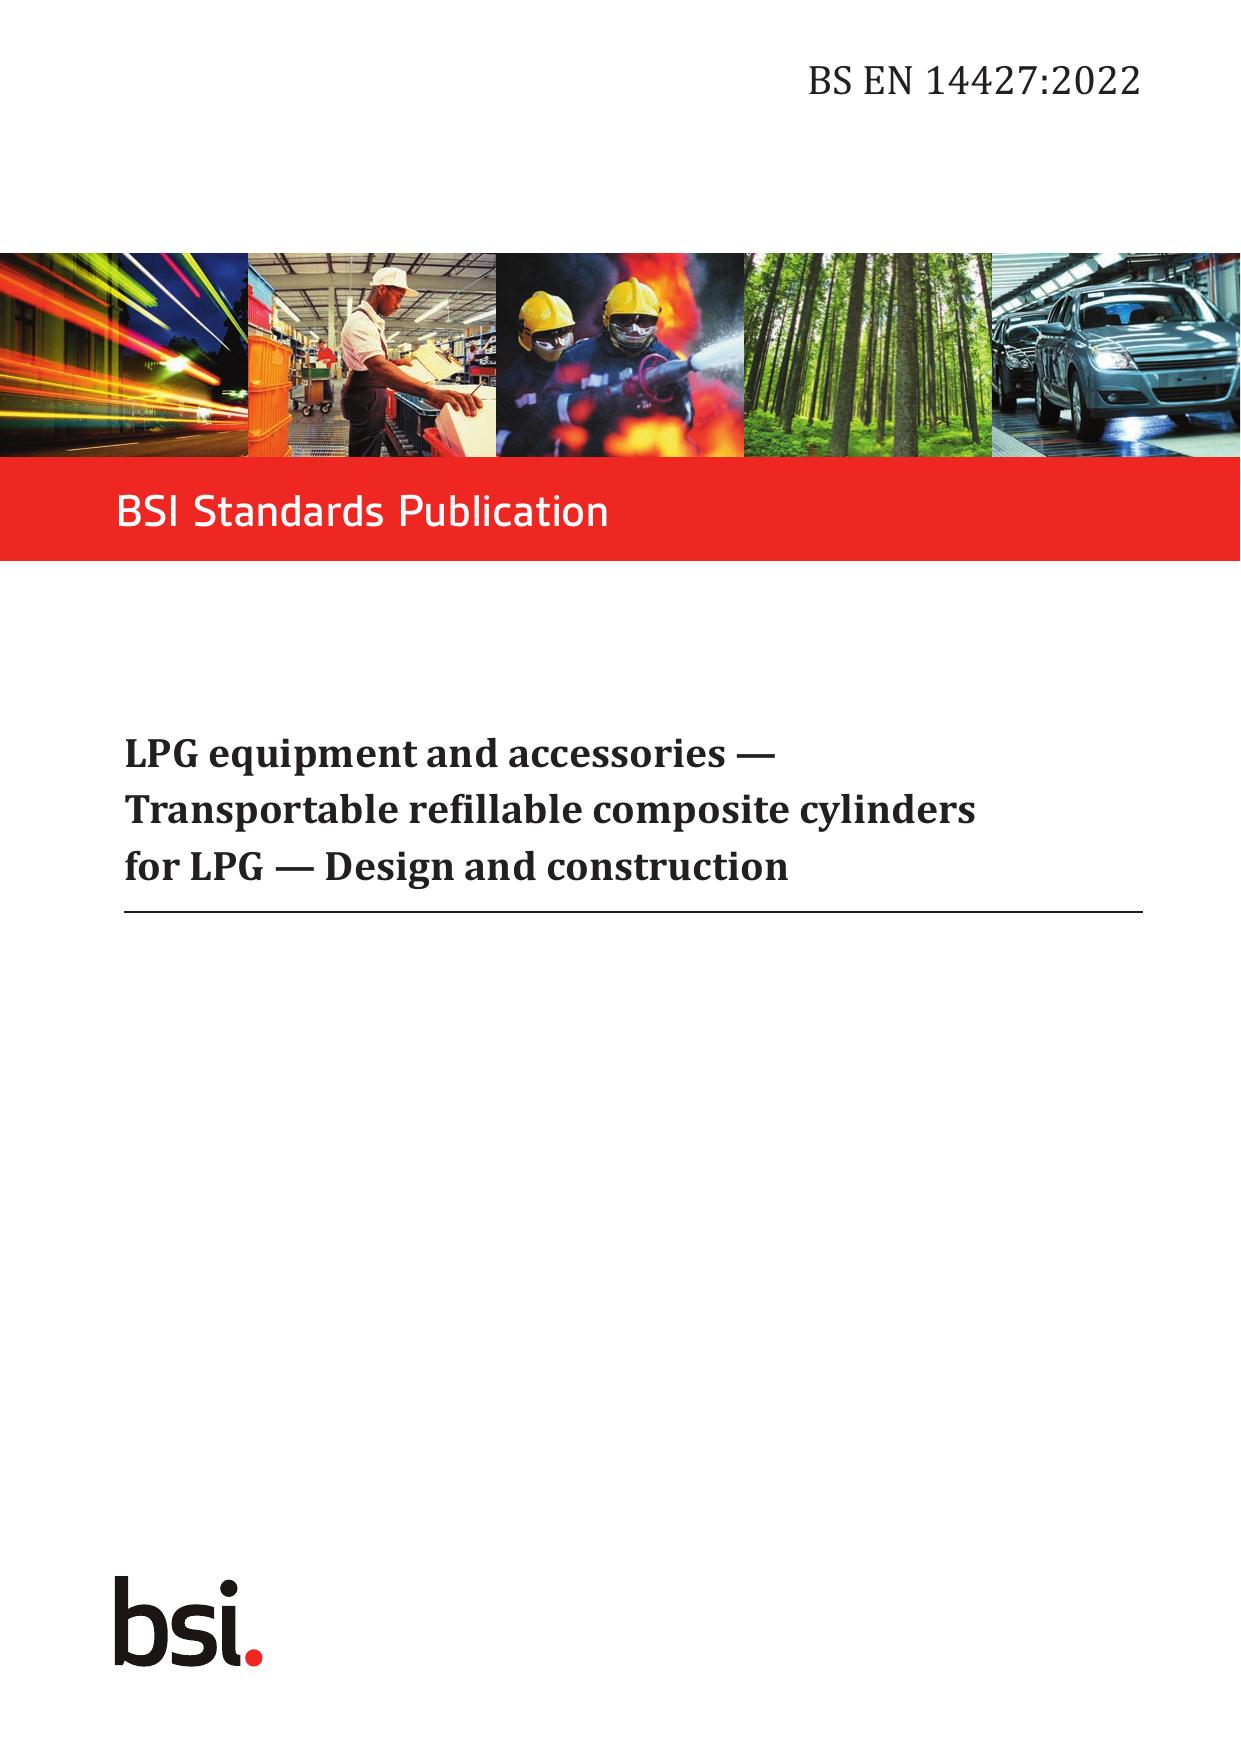 BS EN 14427:2022 by The British Standards Institution